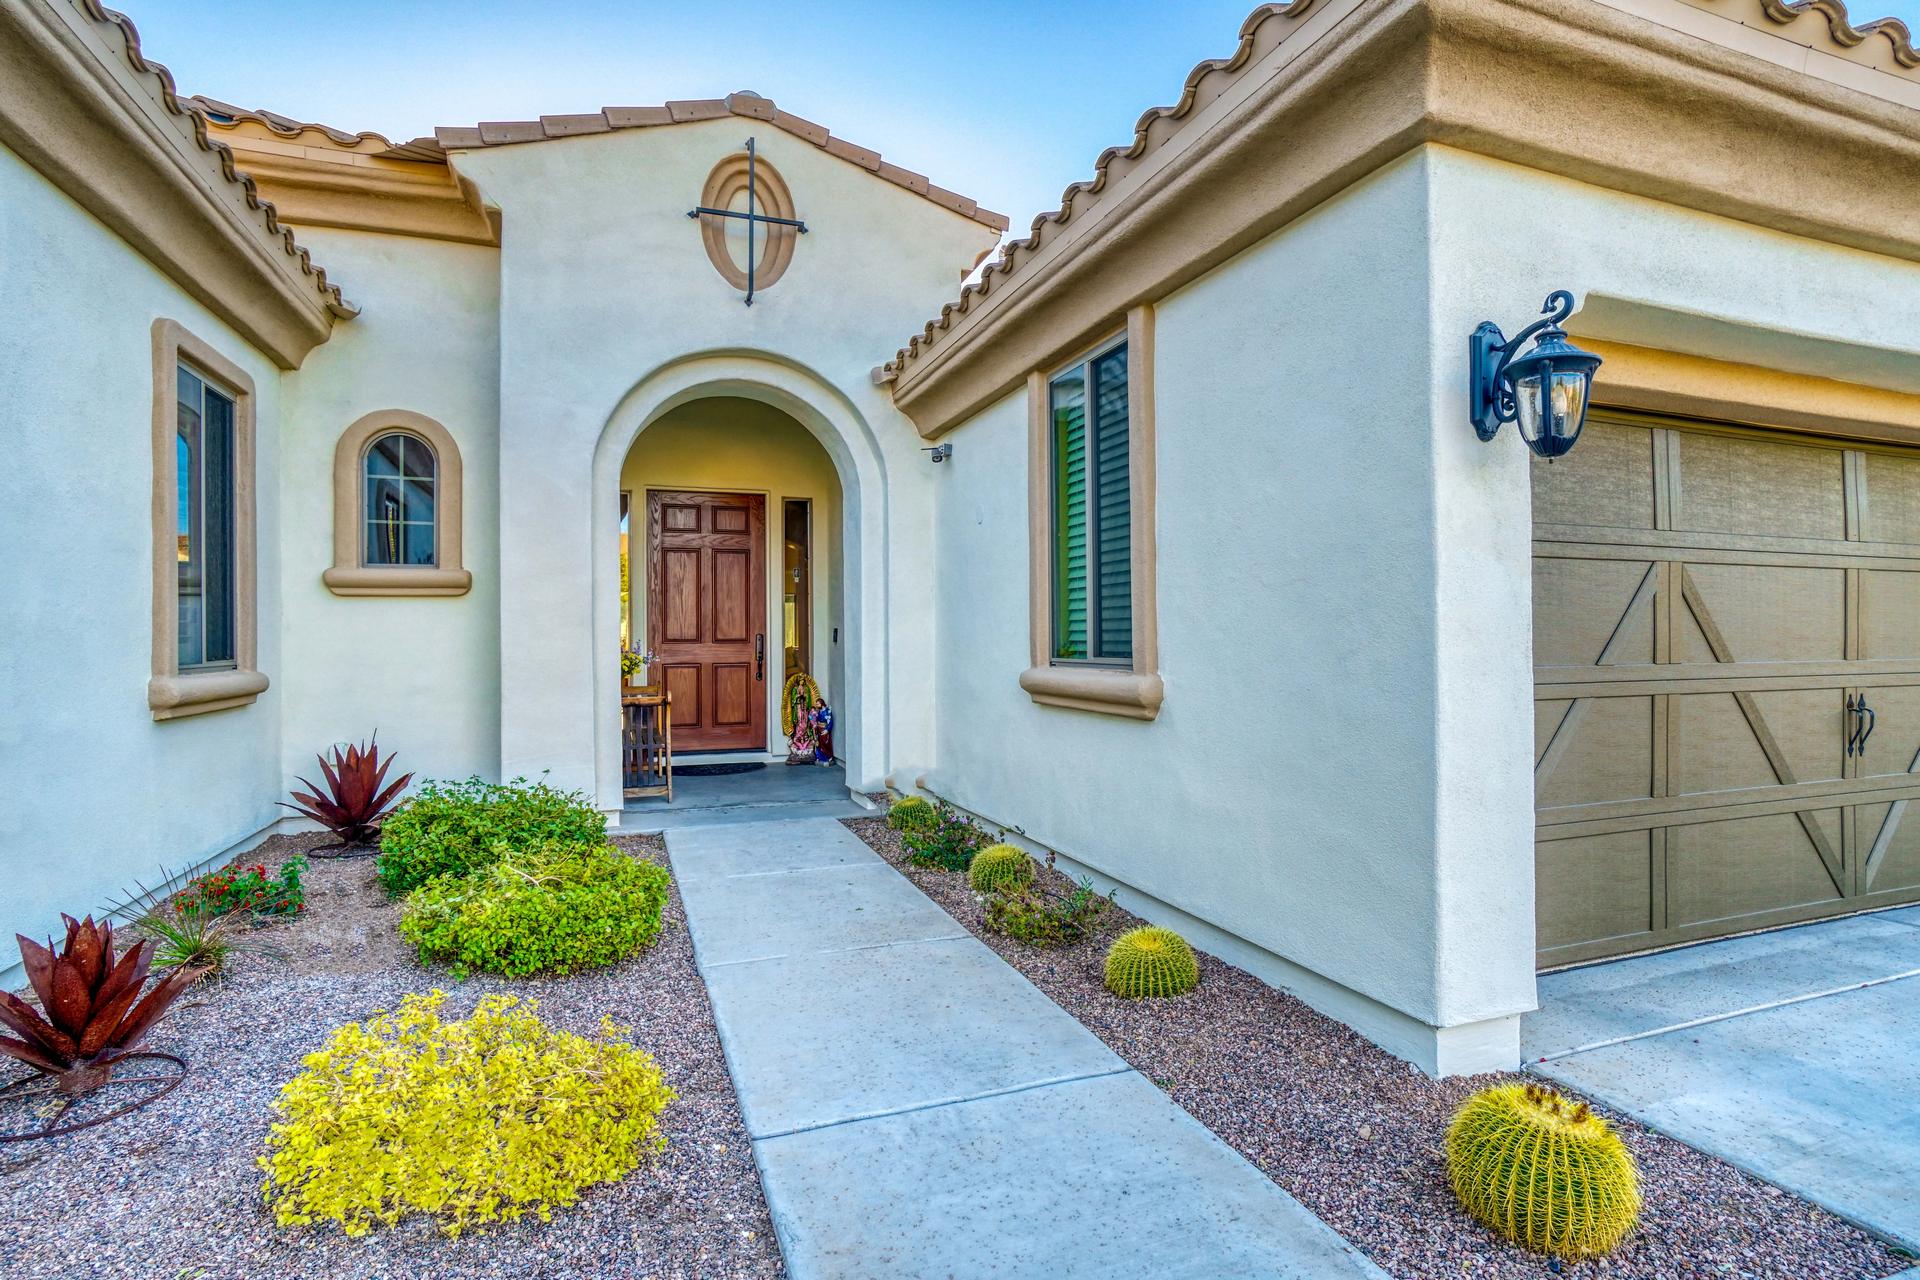 Residential & Commercial House Painters In Scottsdale, AZ